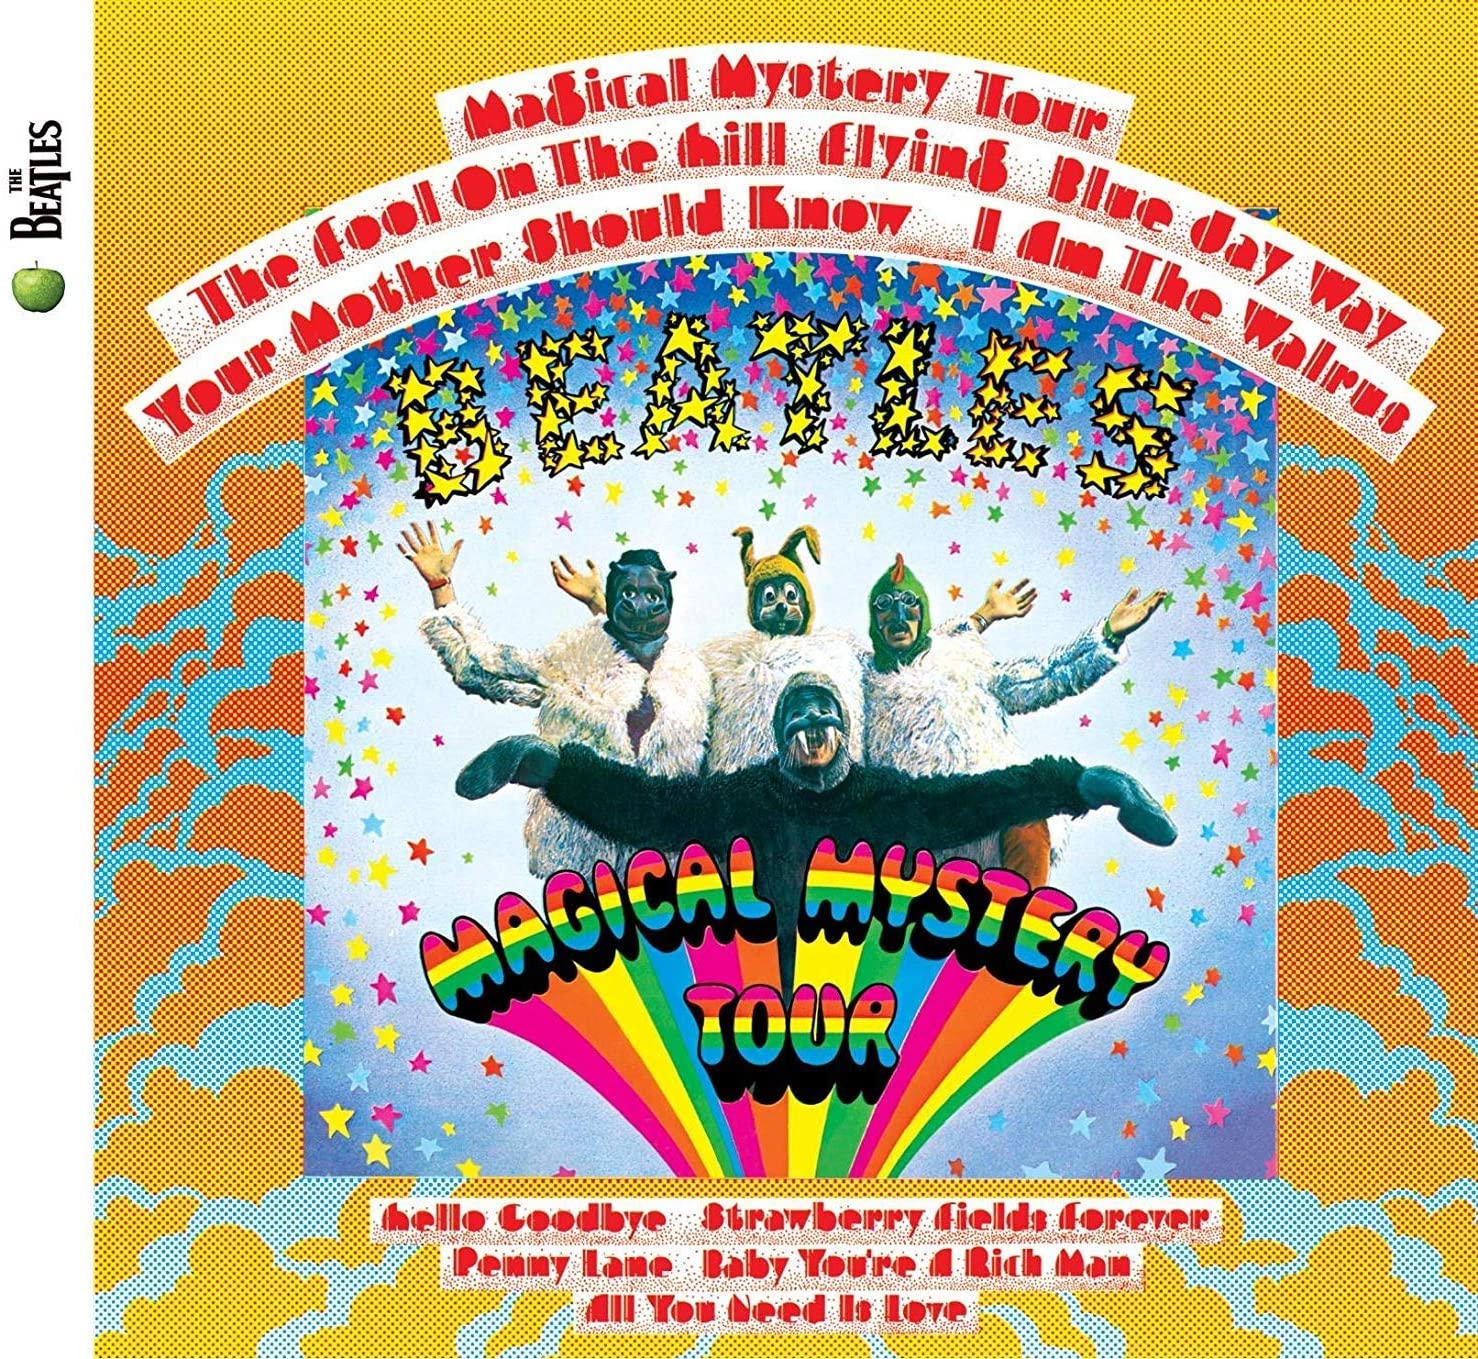 Magical Mystery Tour: The Beatles, The Beatles: Amazon.ca: Music